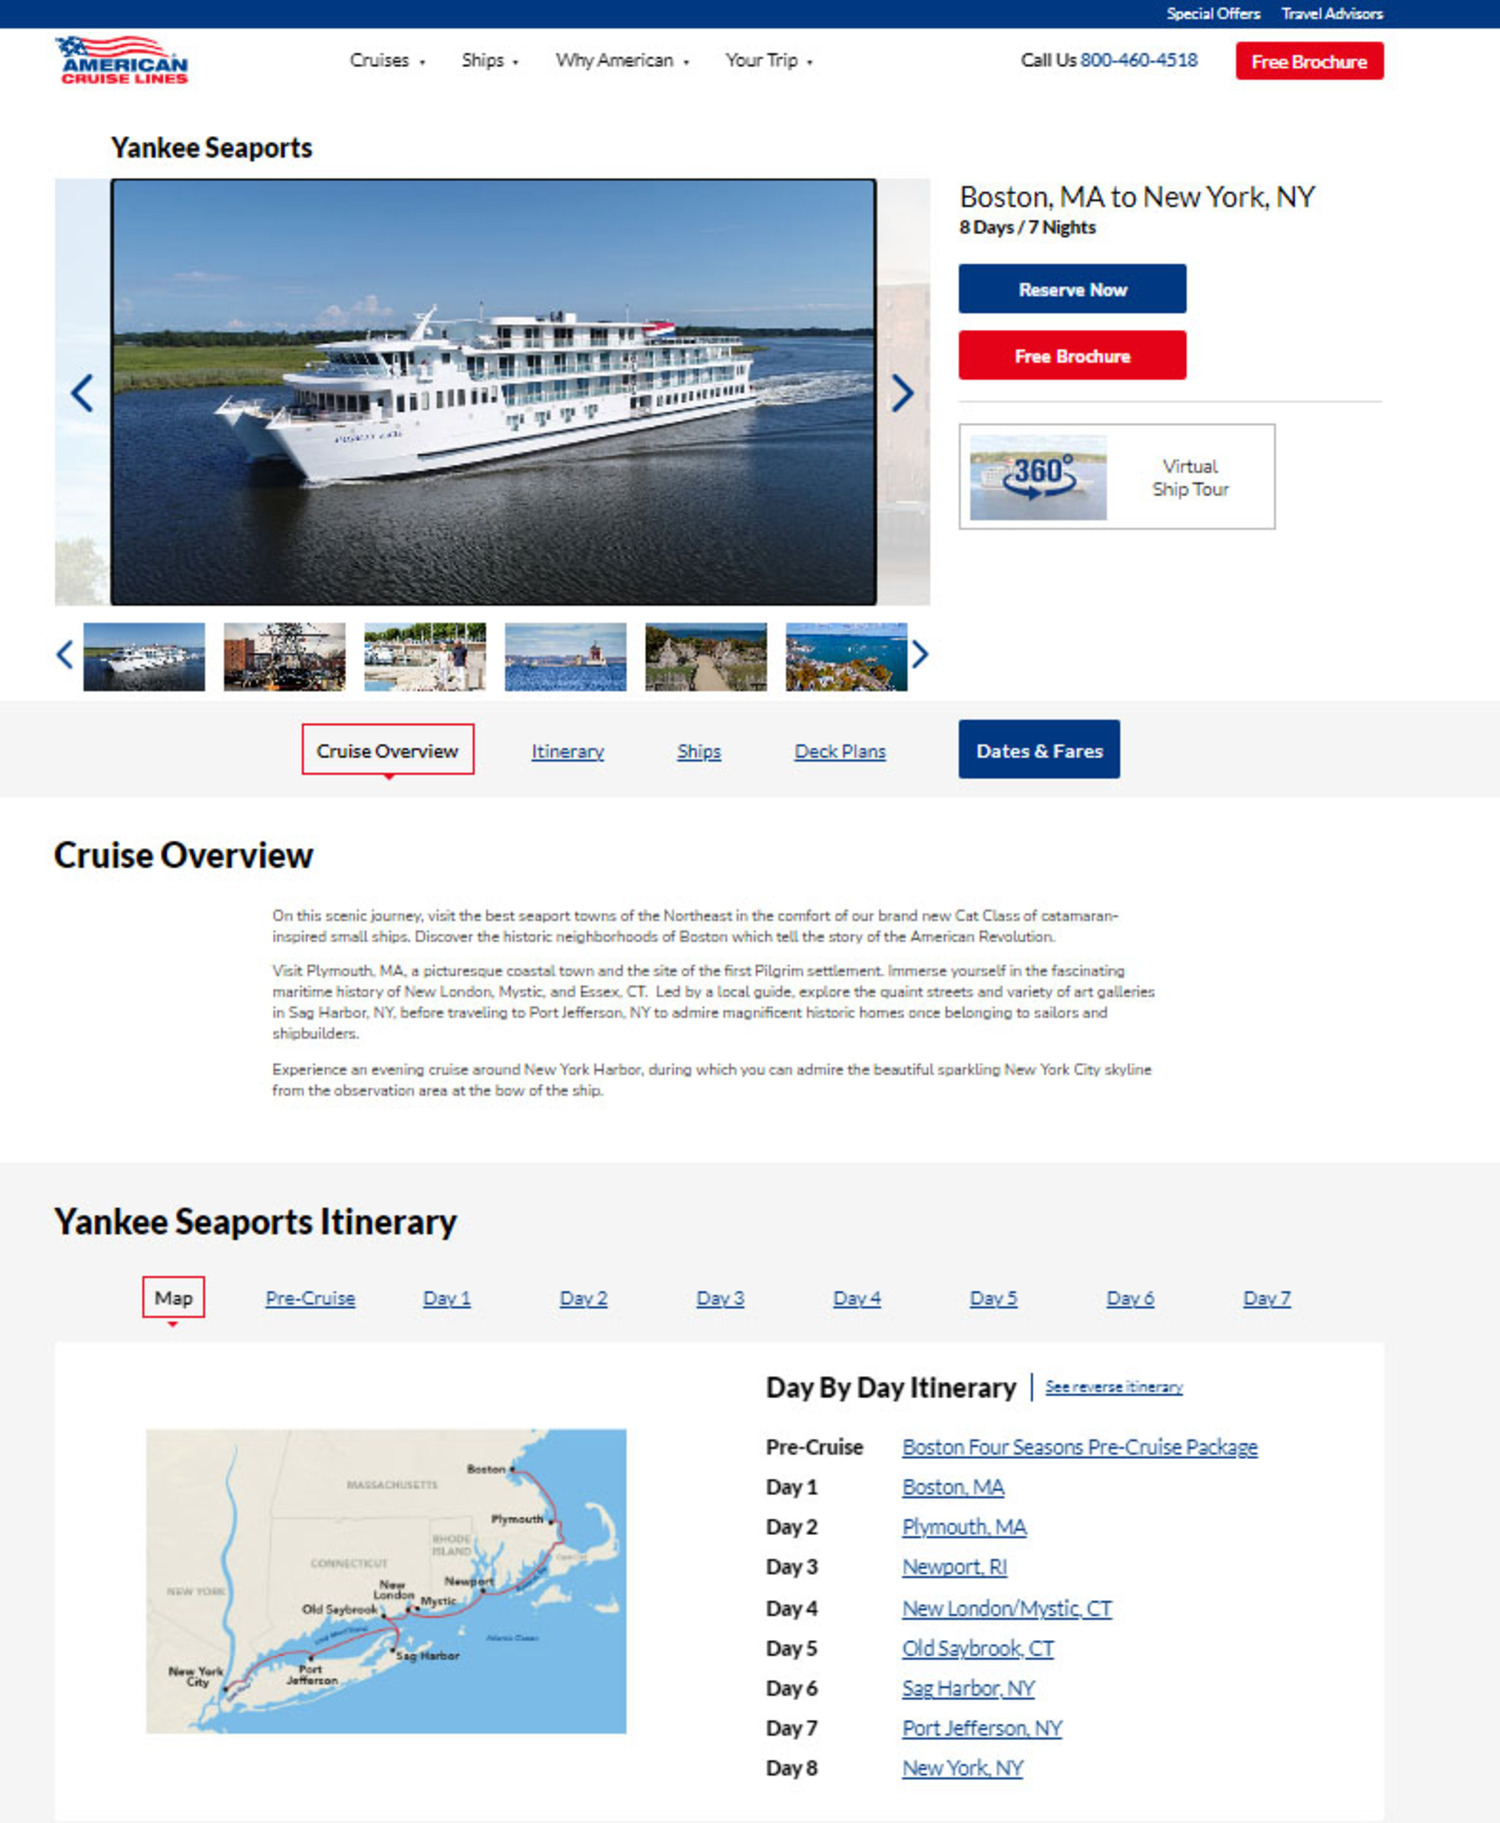 The web page for the American Cruise Lines 